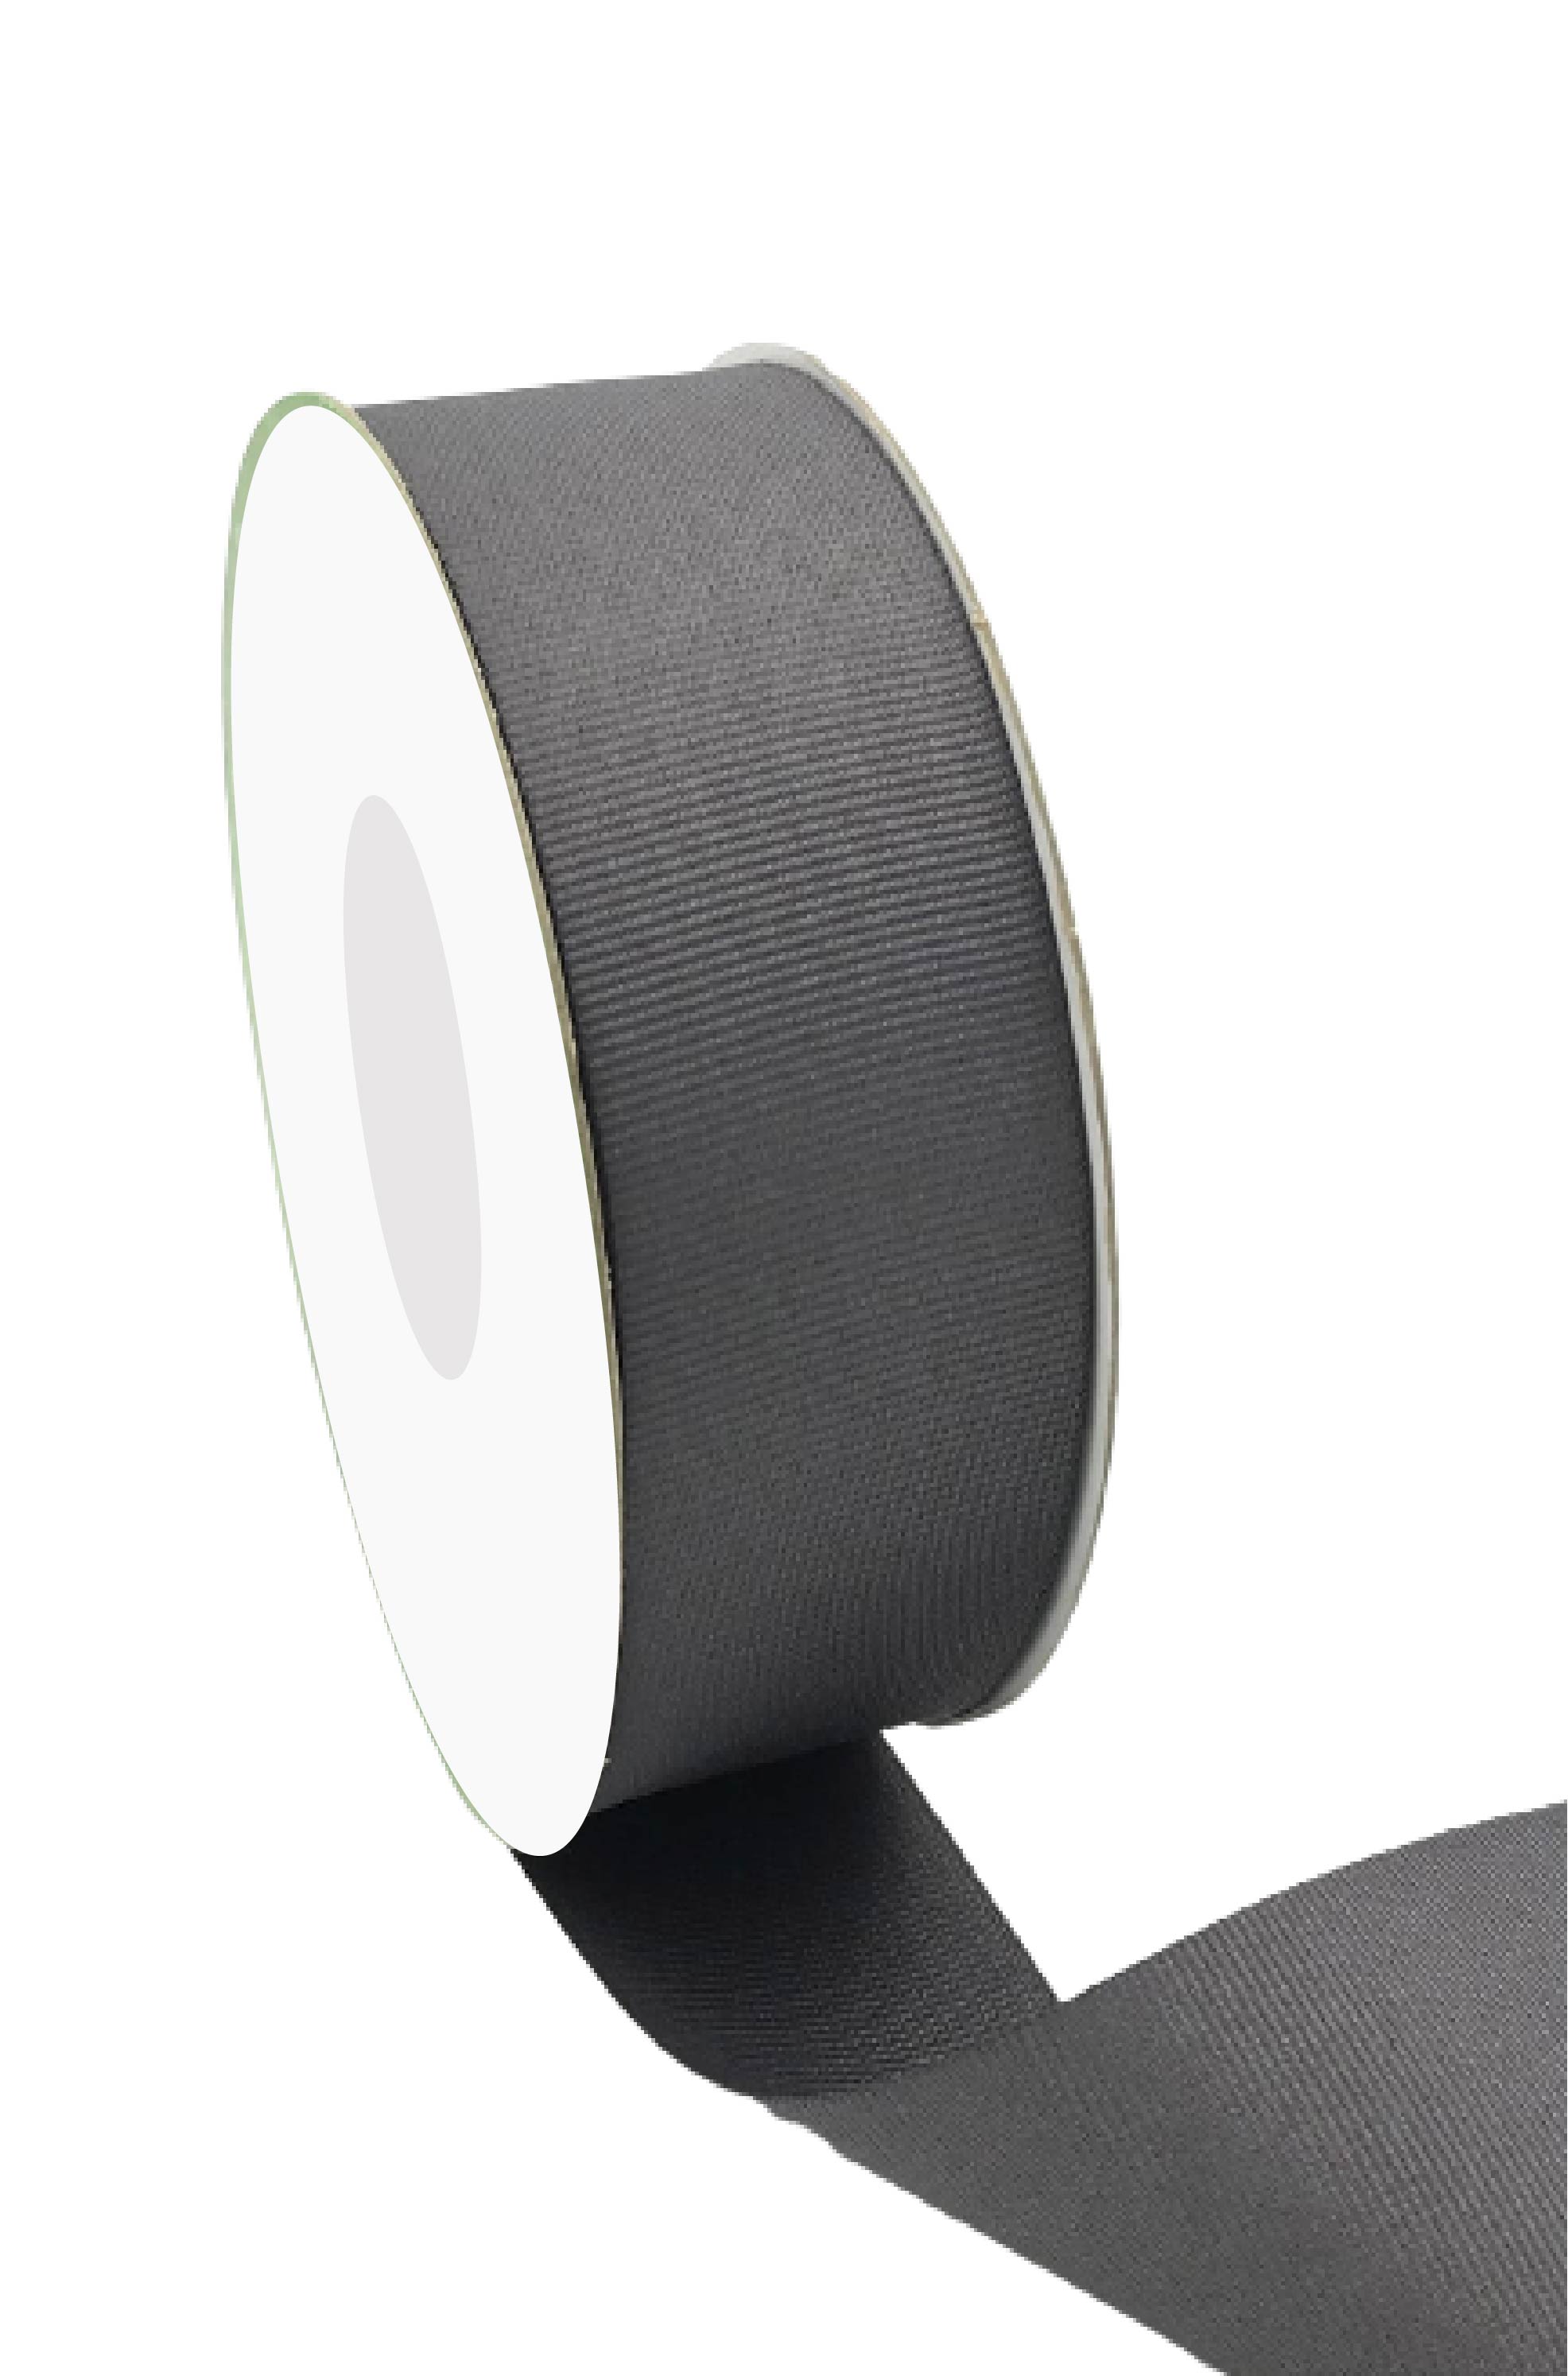 1.5 Inch, Light-Weight Flat Grosgrain Ribbon with Woven Edge, 27 yards